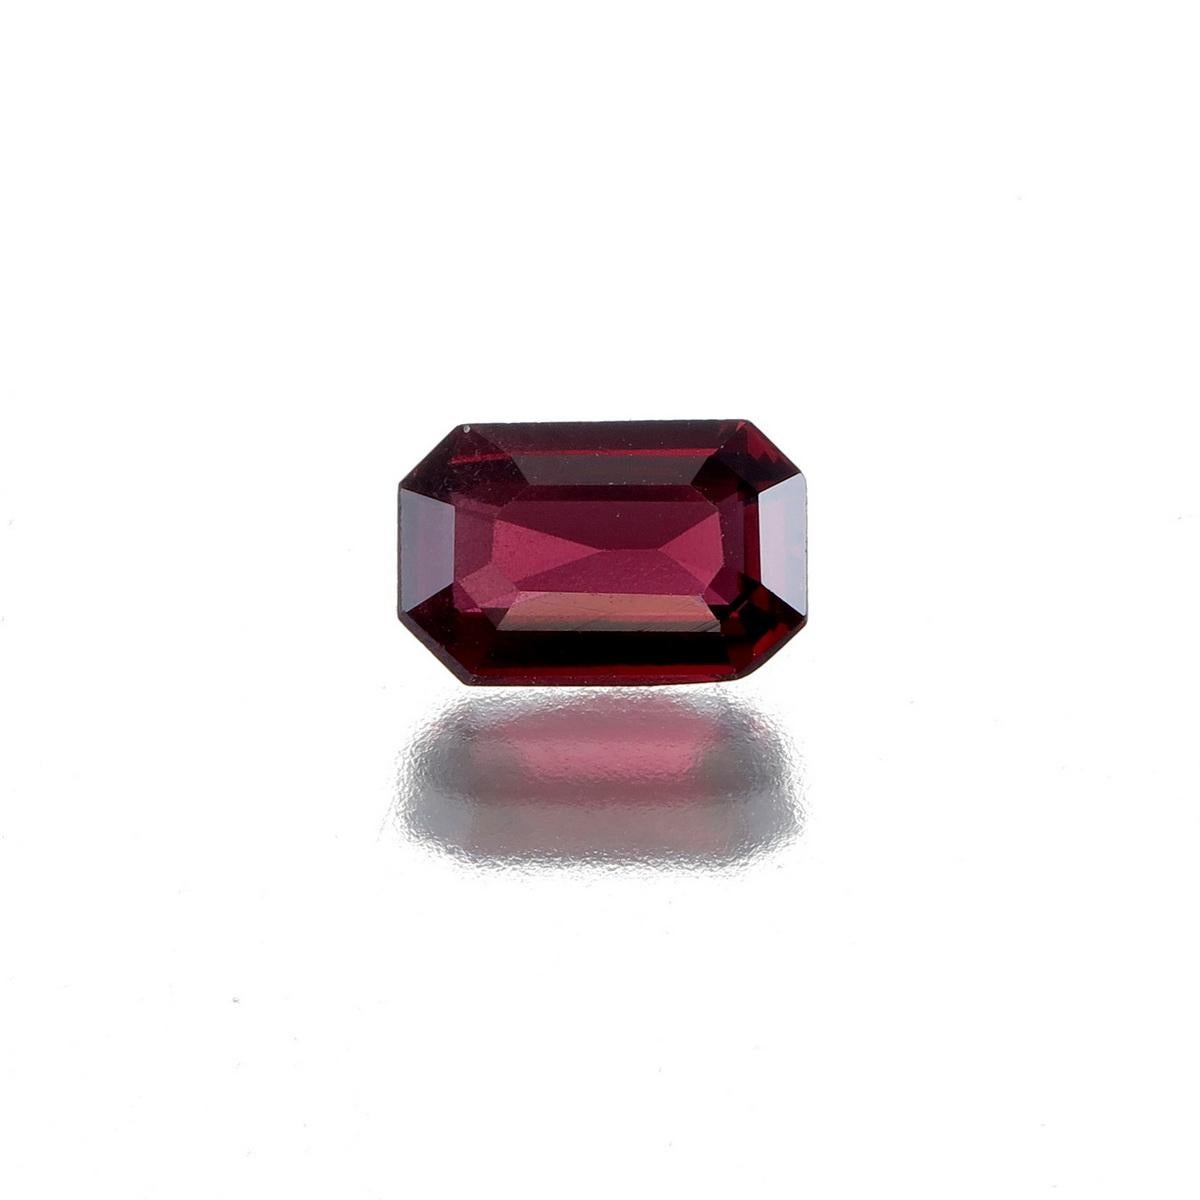 Lovley 1.54 Carat Natural Pinkish Red Spinel from Burma 
Dimension: 8.29 x 5.40 x 3.43 mm
Weight: 1.54 Carat
Shape: Octagonal Cut
No Heat
Gil Certified Report No: ST02022102151332